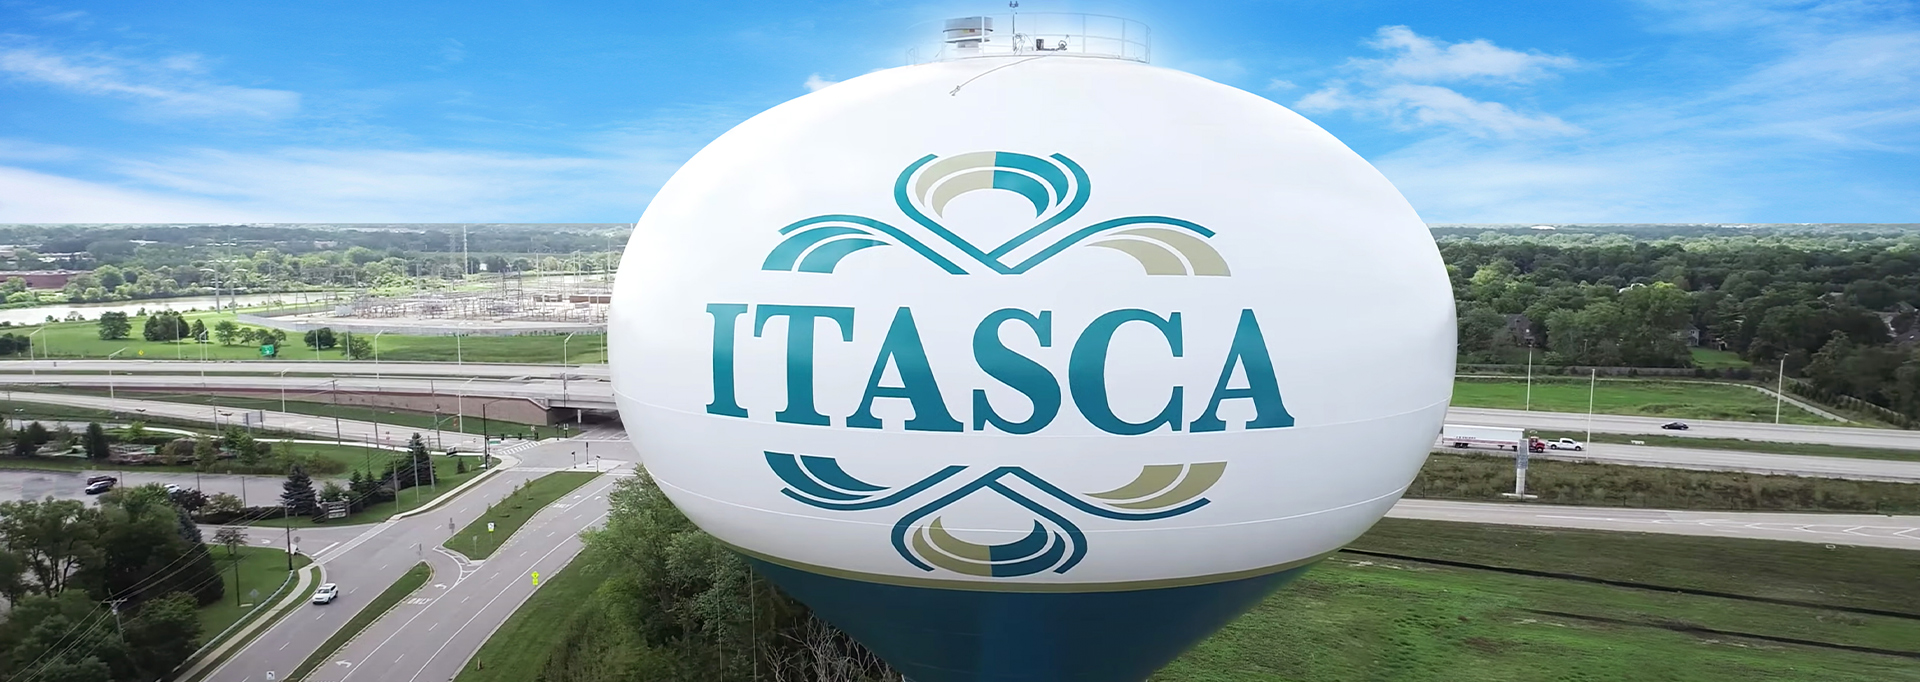 Village of Itasca Water Tower